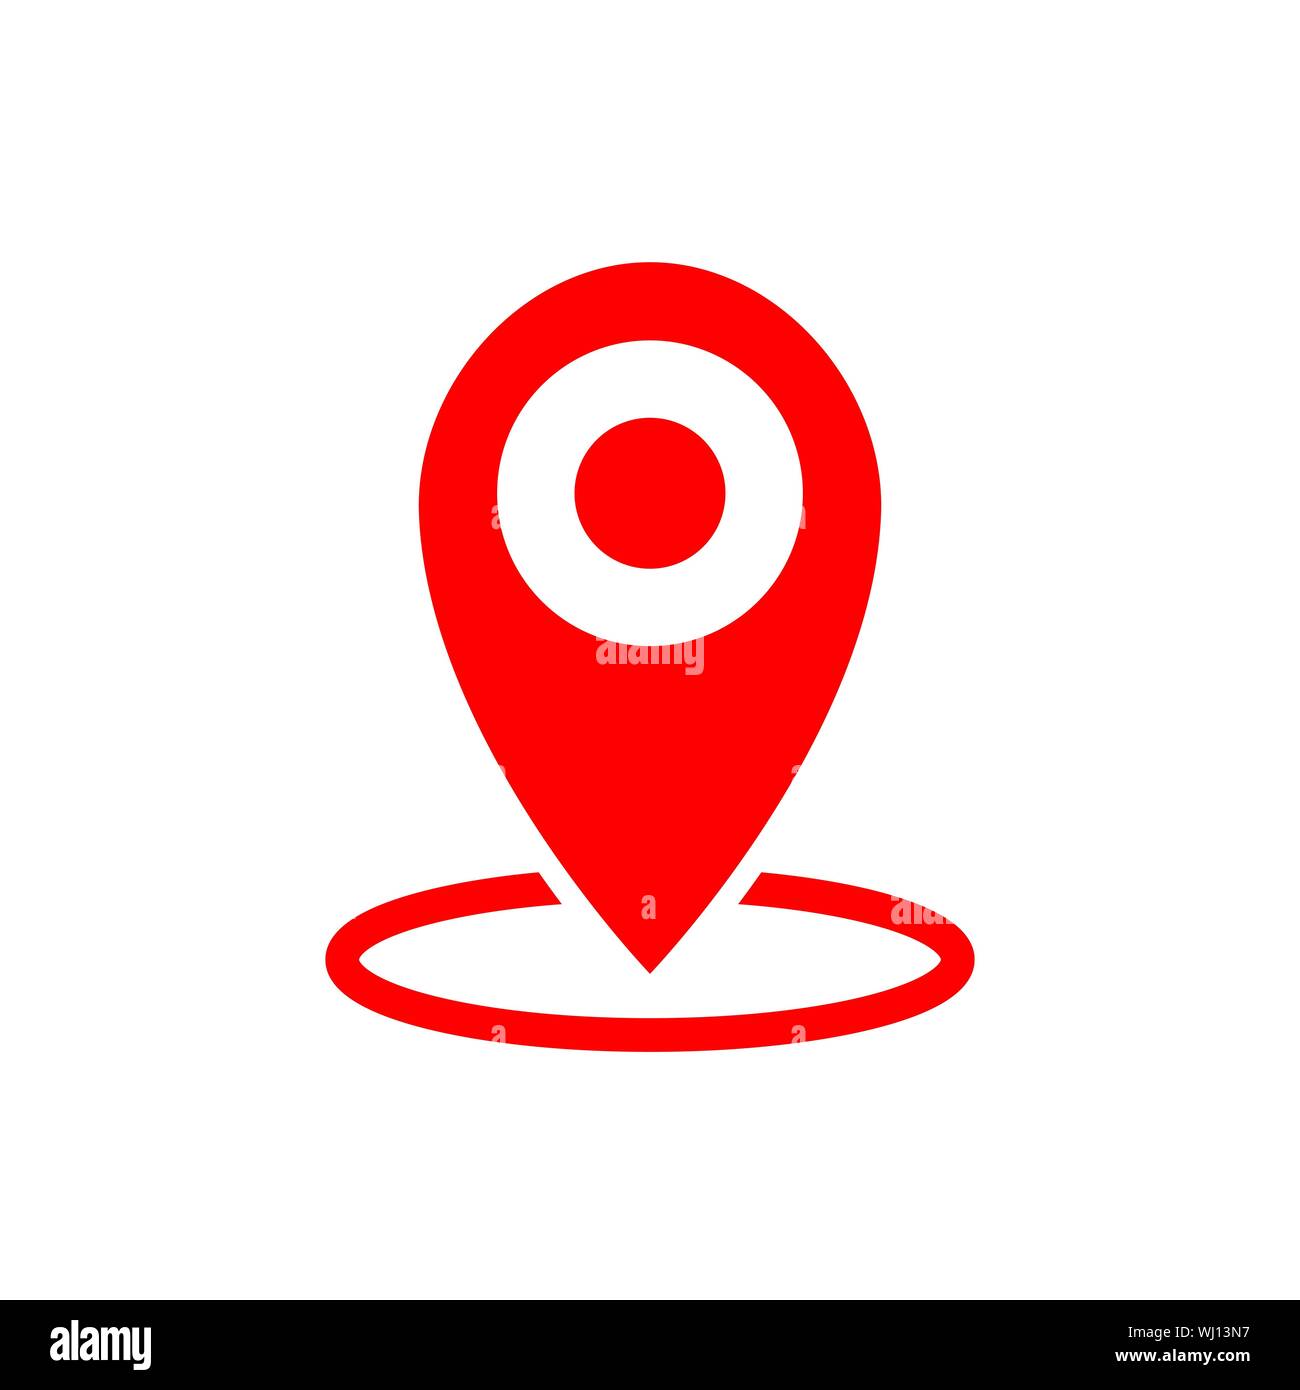 Location map icon. Gps pointer mark symbol Pin sign Isolated on white background Navigation map symbol in flat style Place icon in red Vector illustra Stock Vector